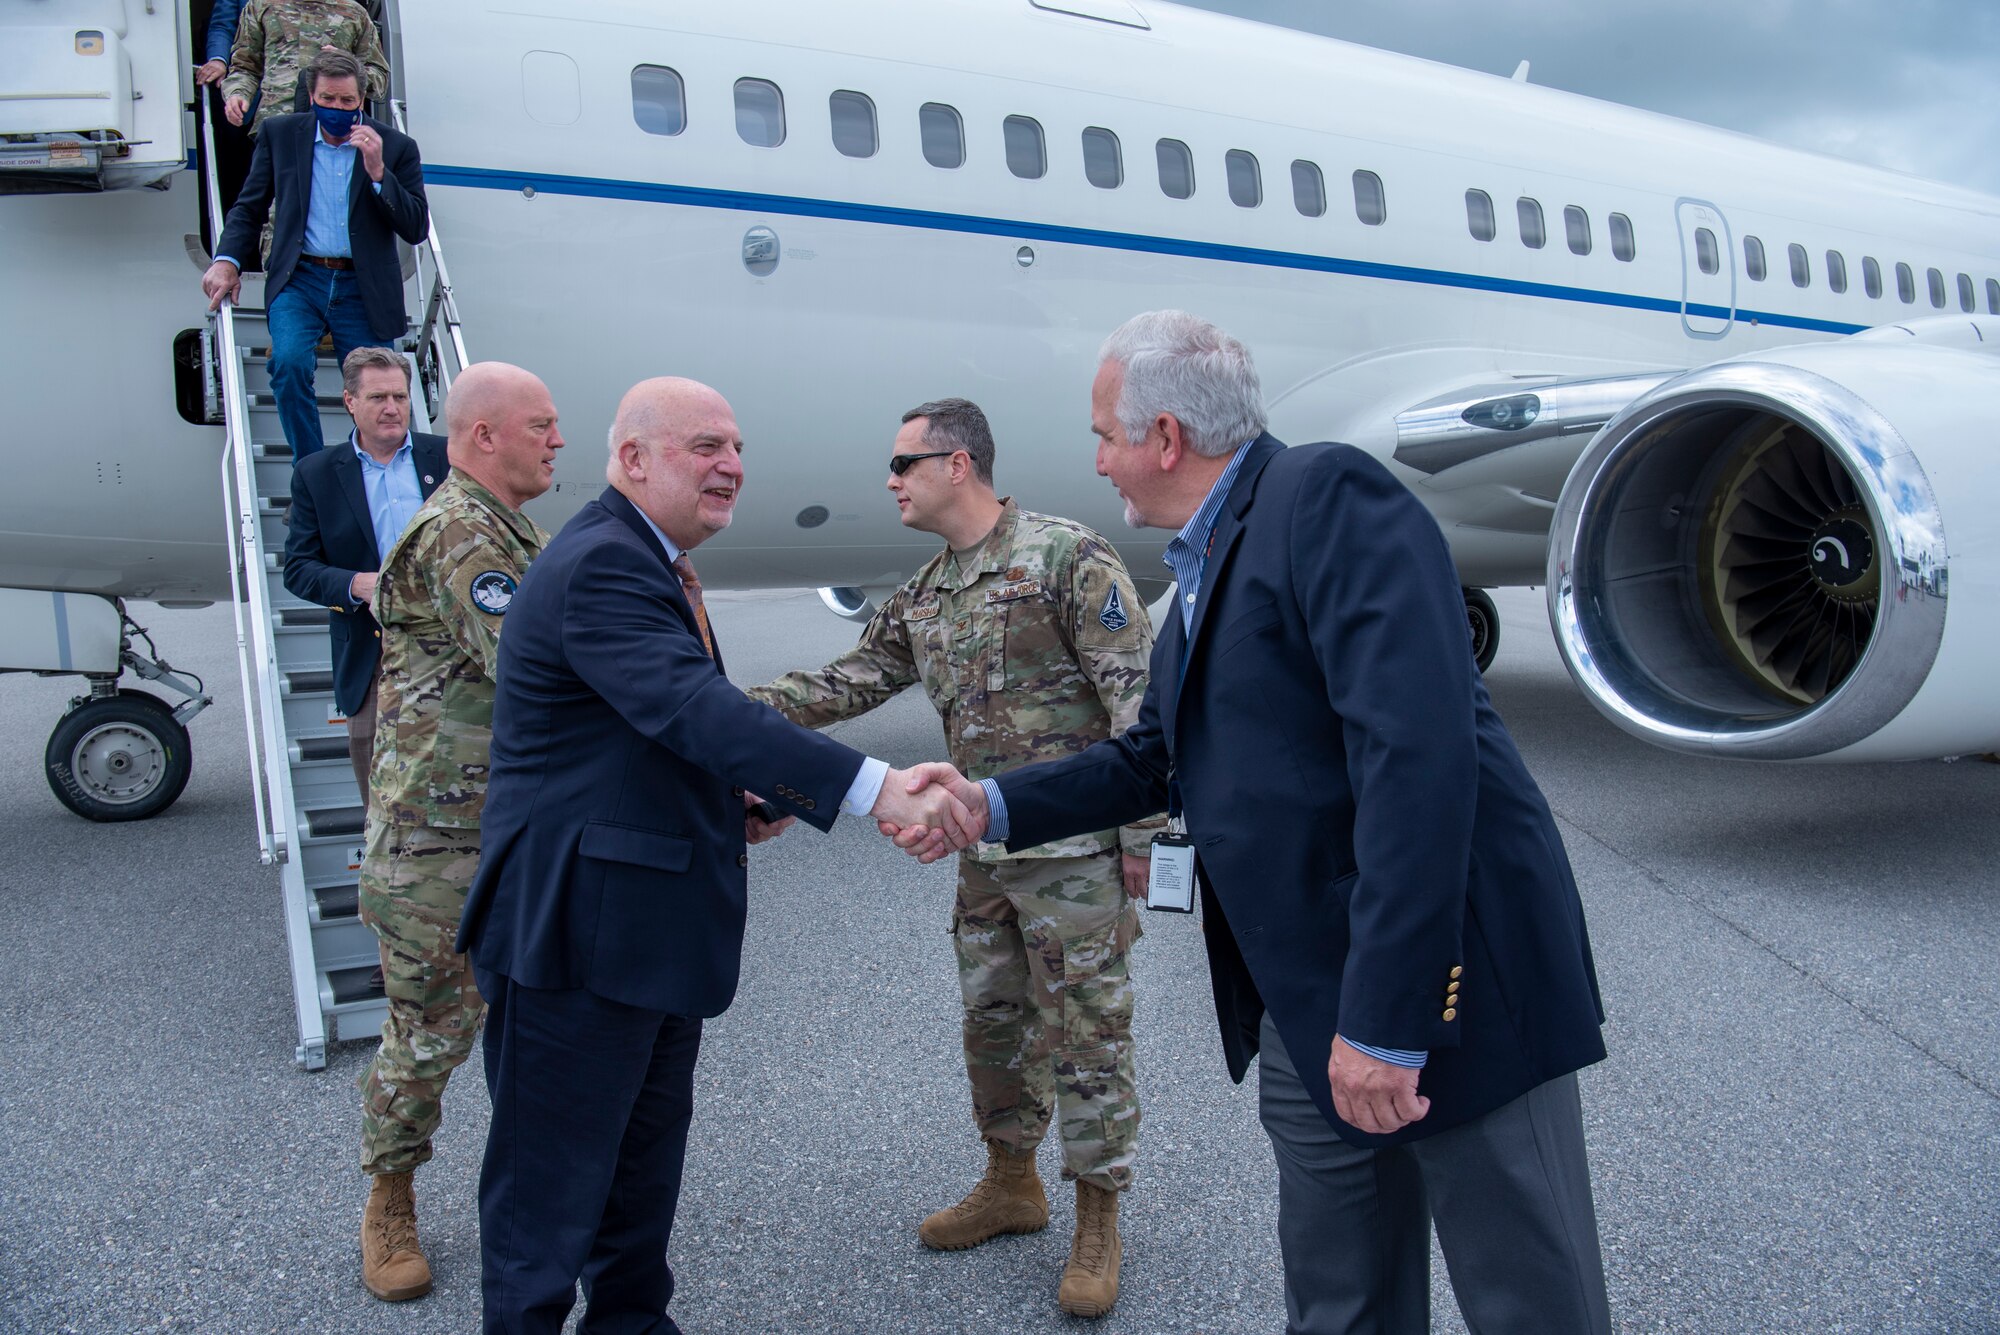 Acting Secretary of the Air Force John P. Roth, greets Scott Cook, Space Launch Delta 45 legislative liaison, as U.S. Space Force Gen. John W. “Jay” Raymond, Chief of Space Operations, greets U.S. Air Force Col. Ed Marshall, SLD 45 vice commander of support, after arriving at Cape Canaveral Space Force Station, Fla., May 17, 2021. Roth and Raymond visited the installation to meet with Airmen and Guardians supporting space launch operations and learn more about the partnerships between CCSFS and commercial companies. (U.S. Space Force photo by Tech. Sgt. James Hodgman)